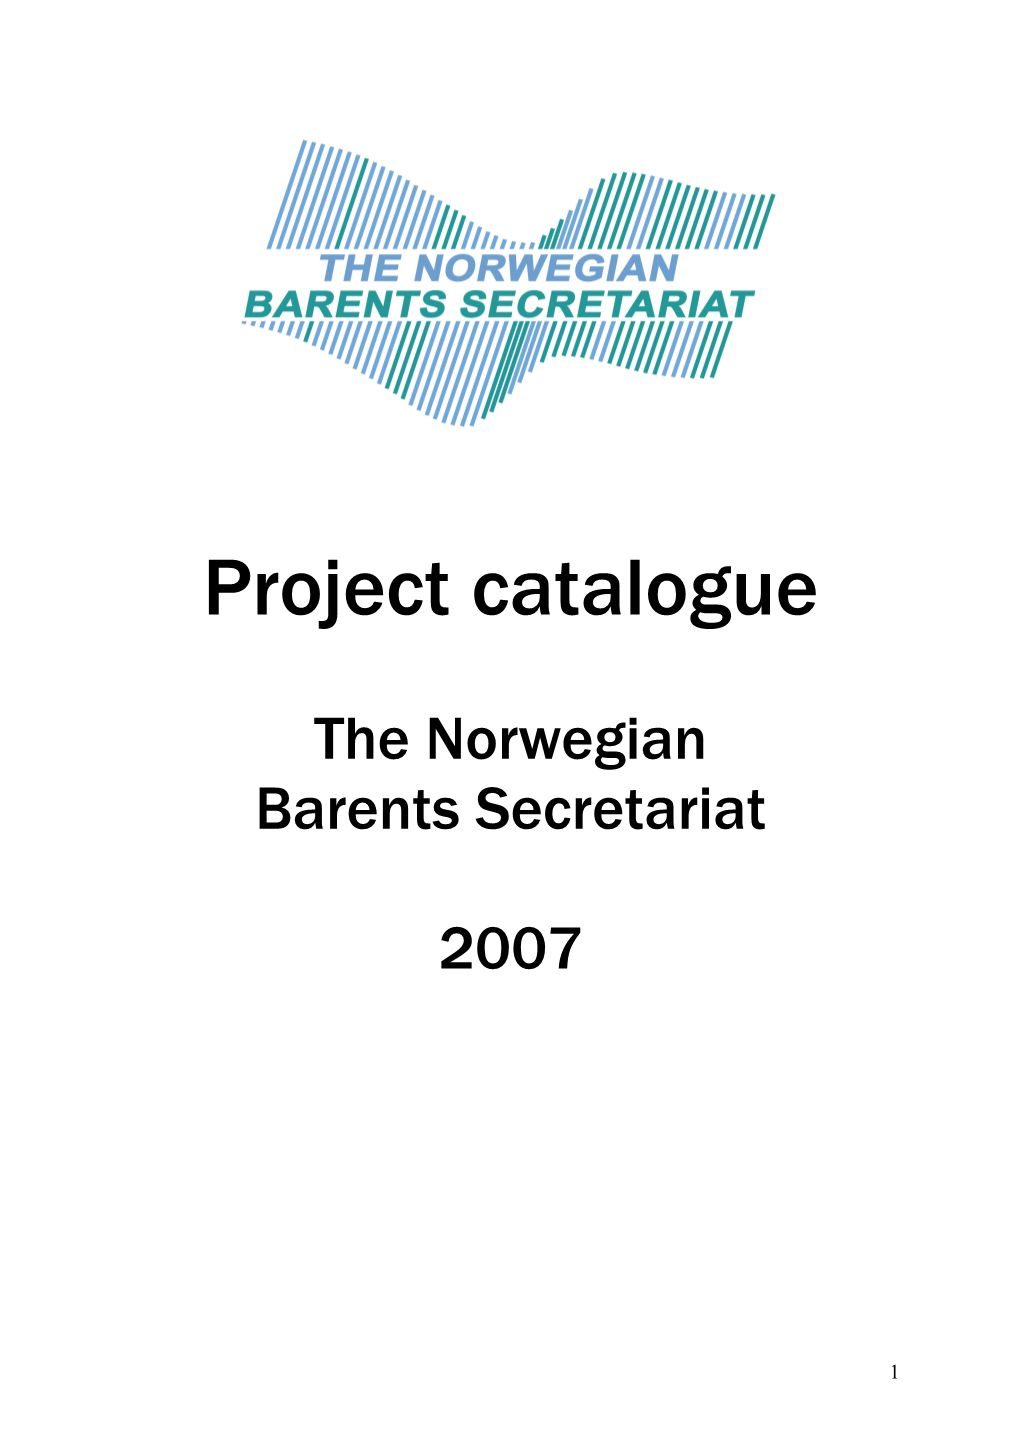 Project Catalogue